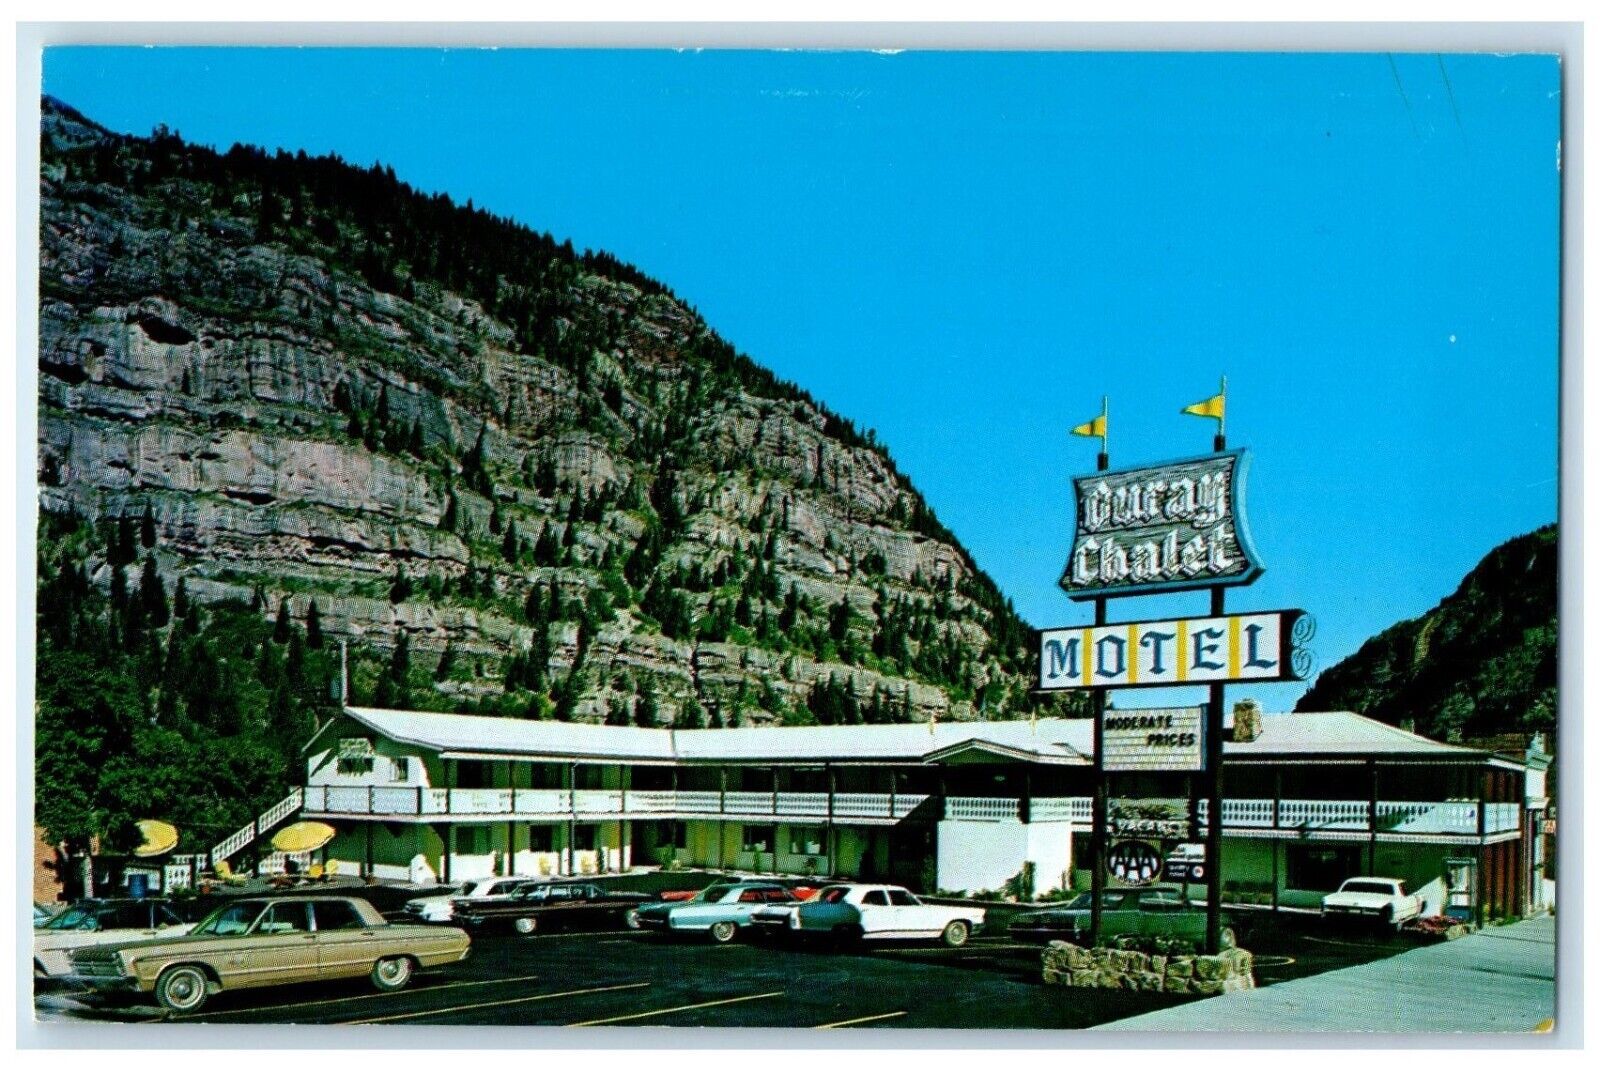 1969 Ouray Chalet Motel Parking  Switzerland America Ouray Colorado Postcard